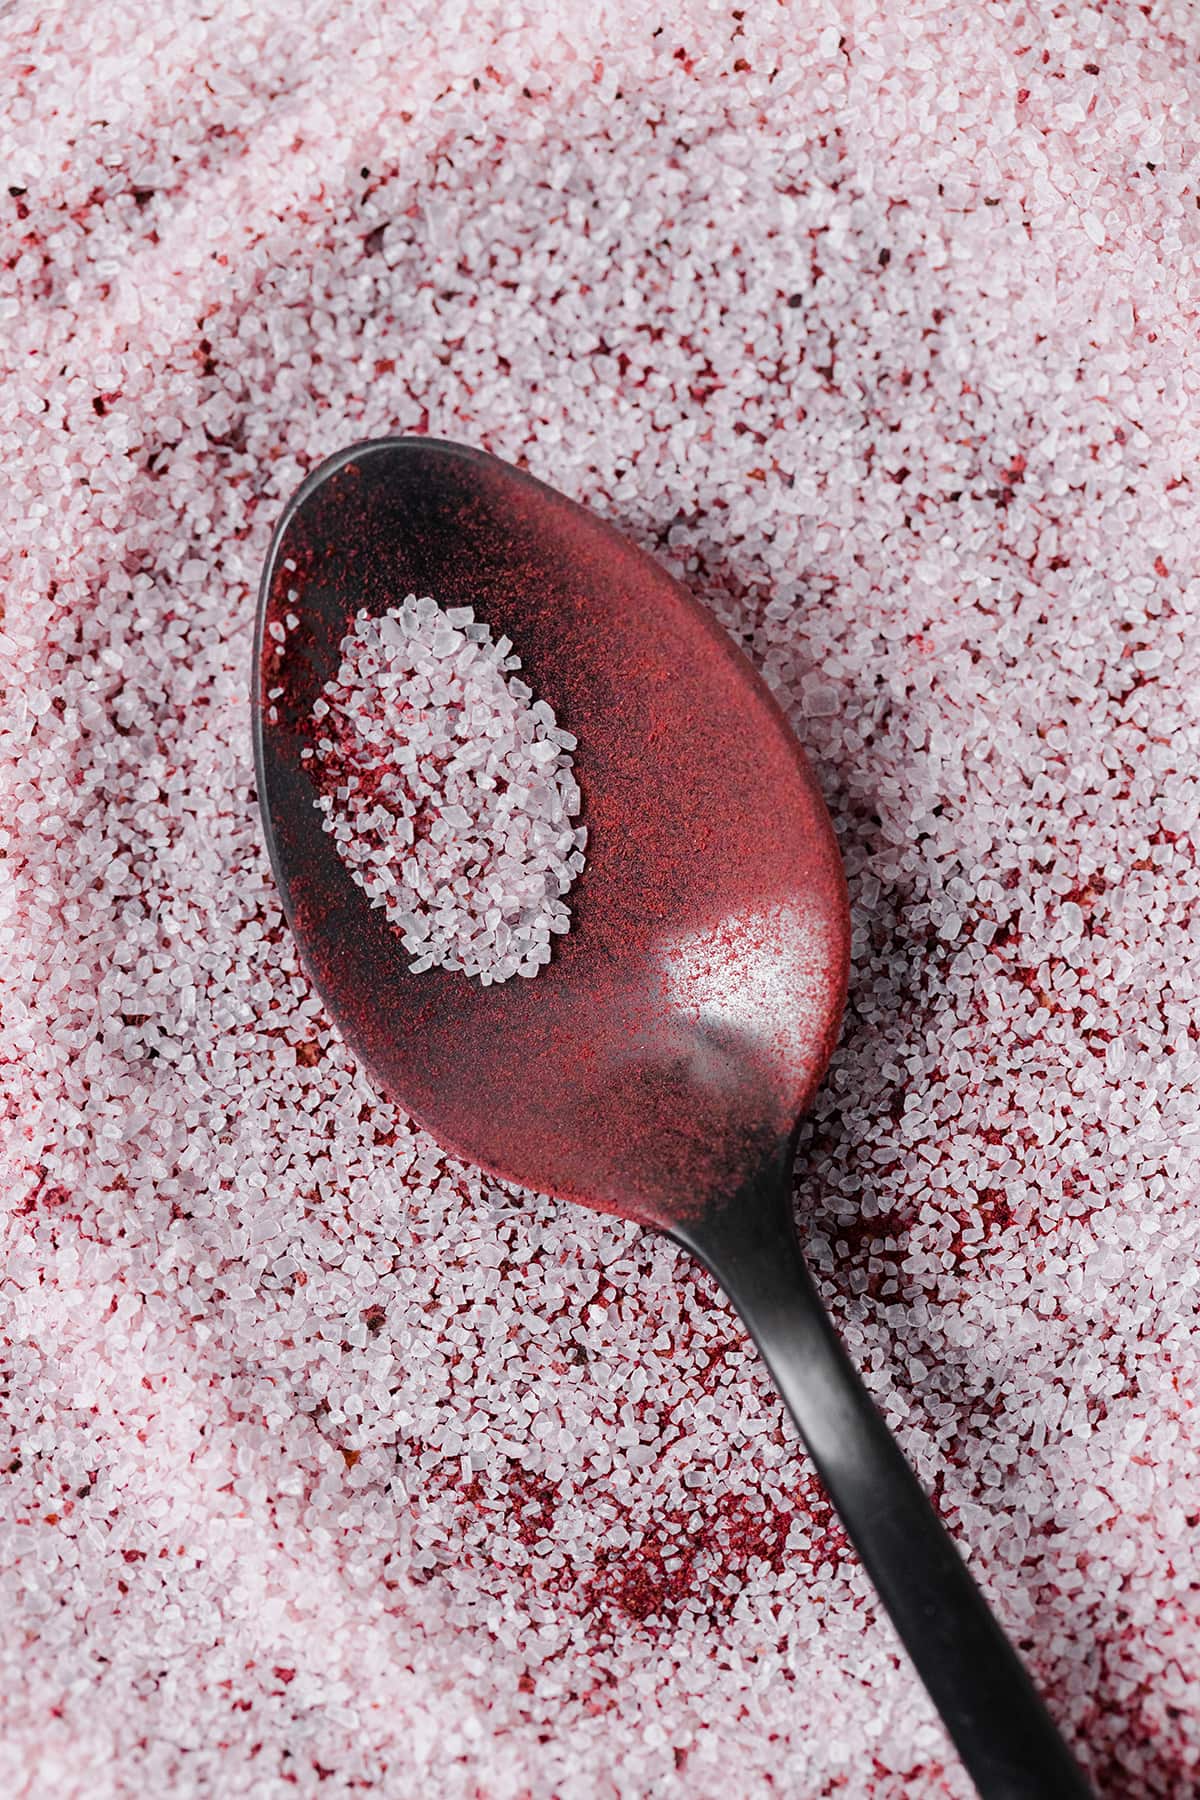 Salt with beet powder for the rim of the margarita glass.